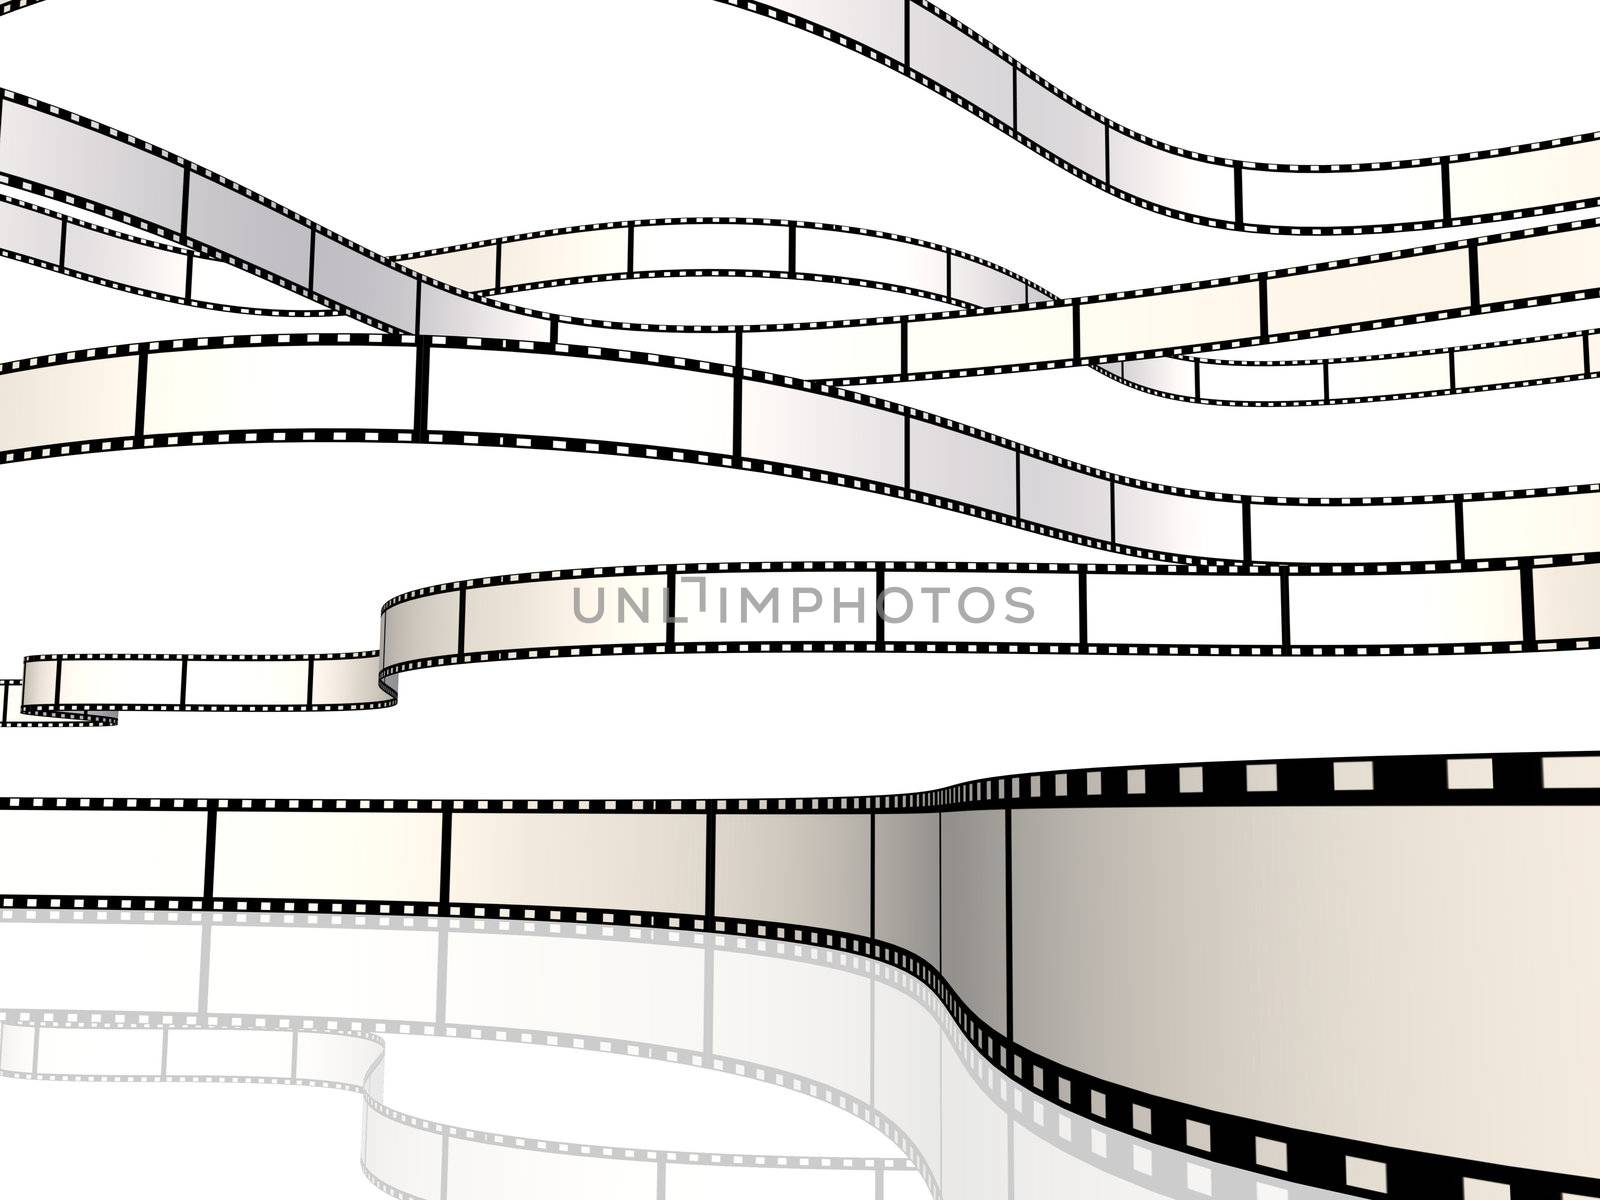 Image of multiple film reels isolated on a white background.